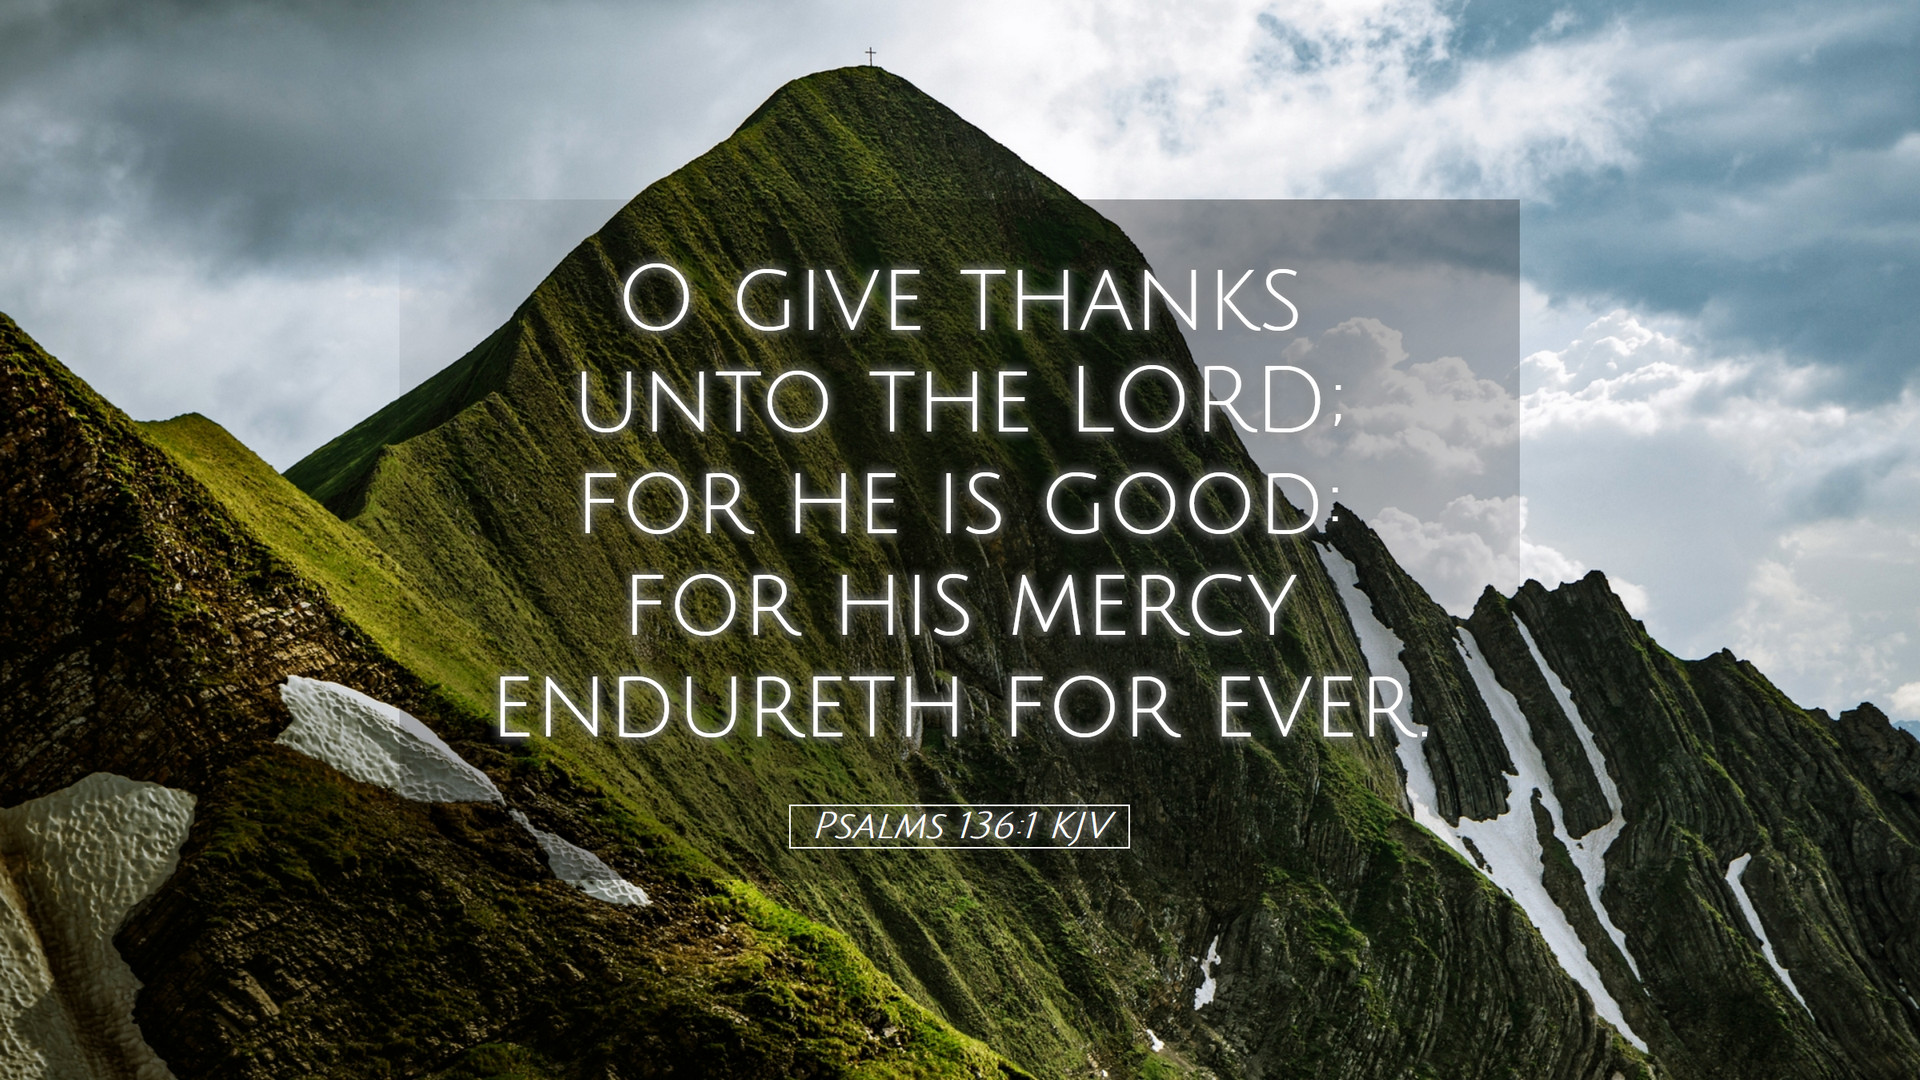 Psalms 136:1 KJV Desktop Wallpaper give thanks unto the LORD; for he is good: for